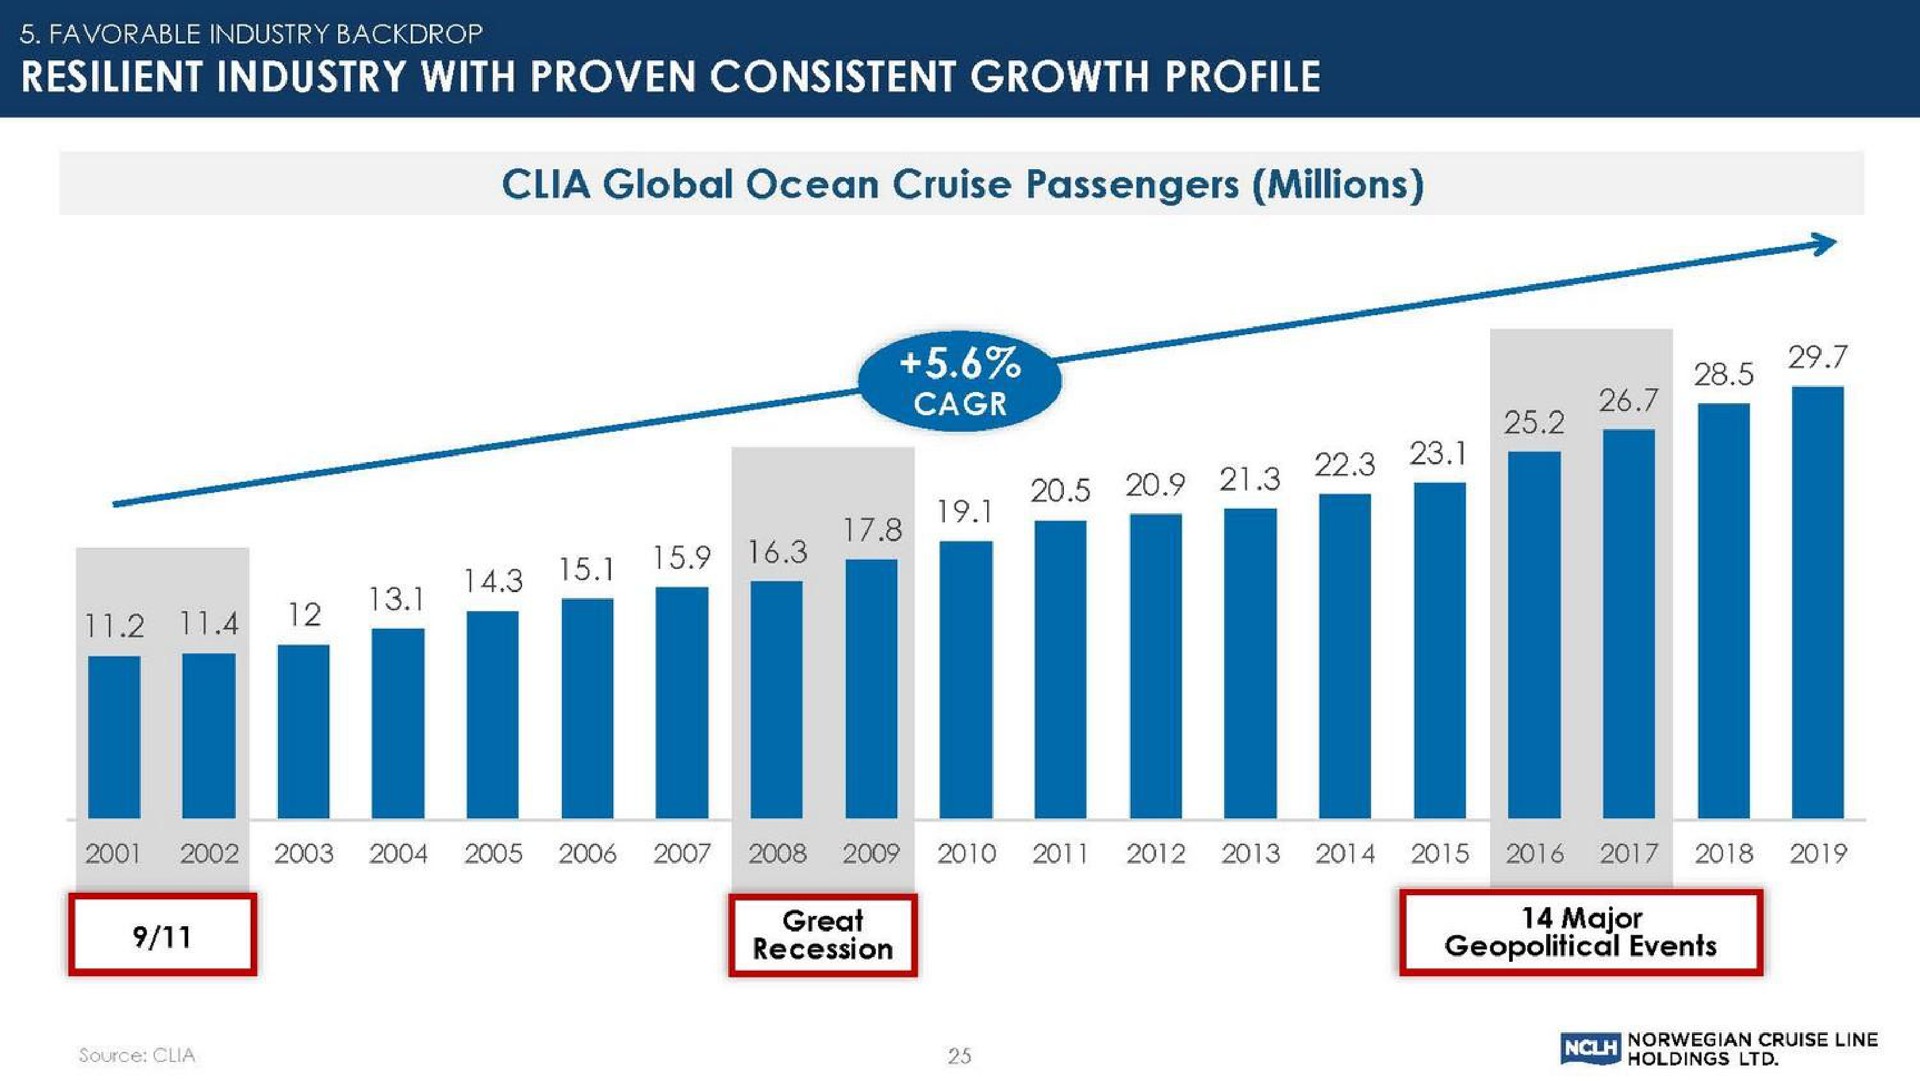 resilient industry with proven consistent growth profile | Norwegian Cruise Line